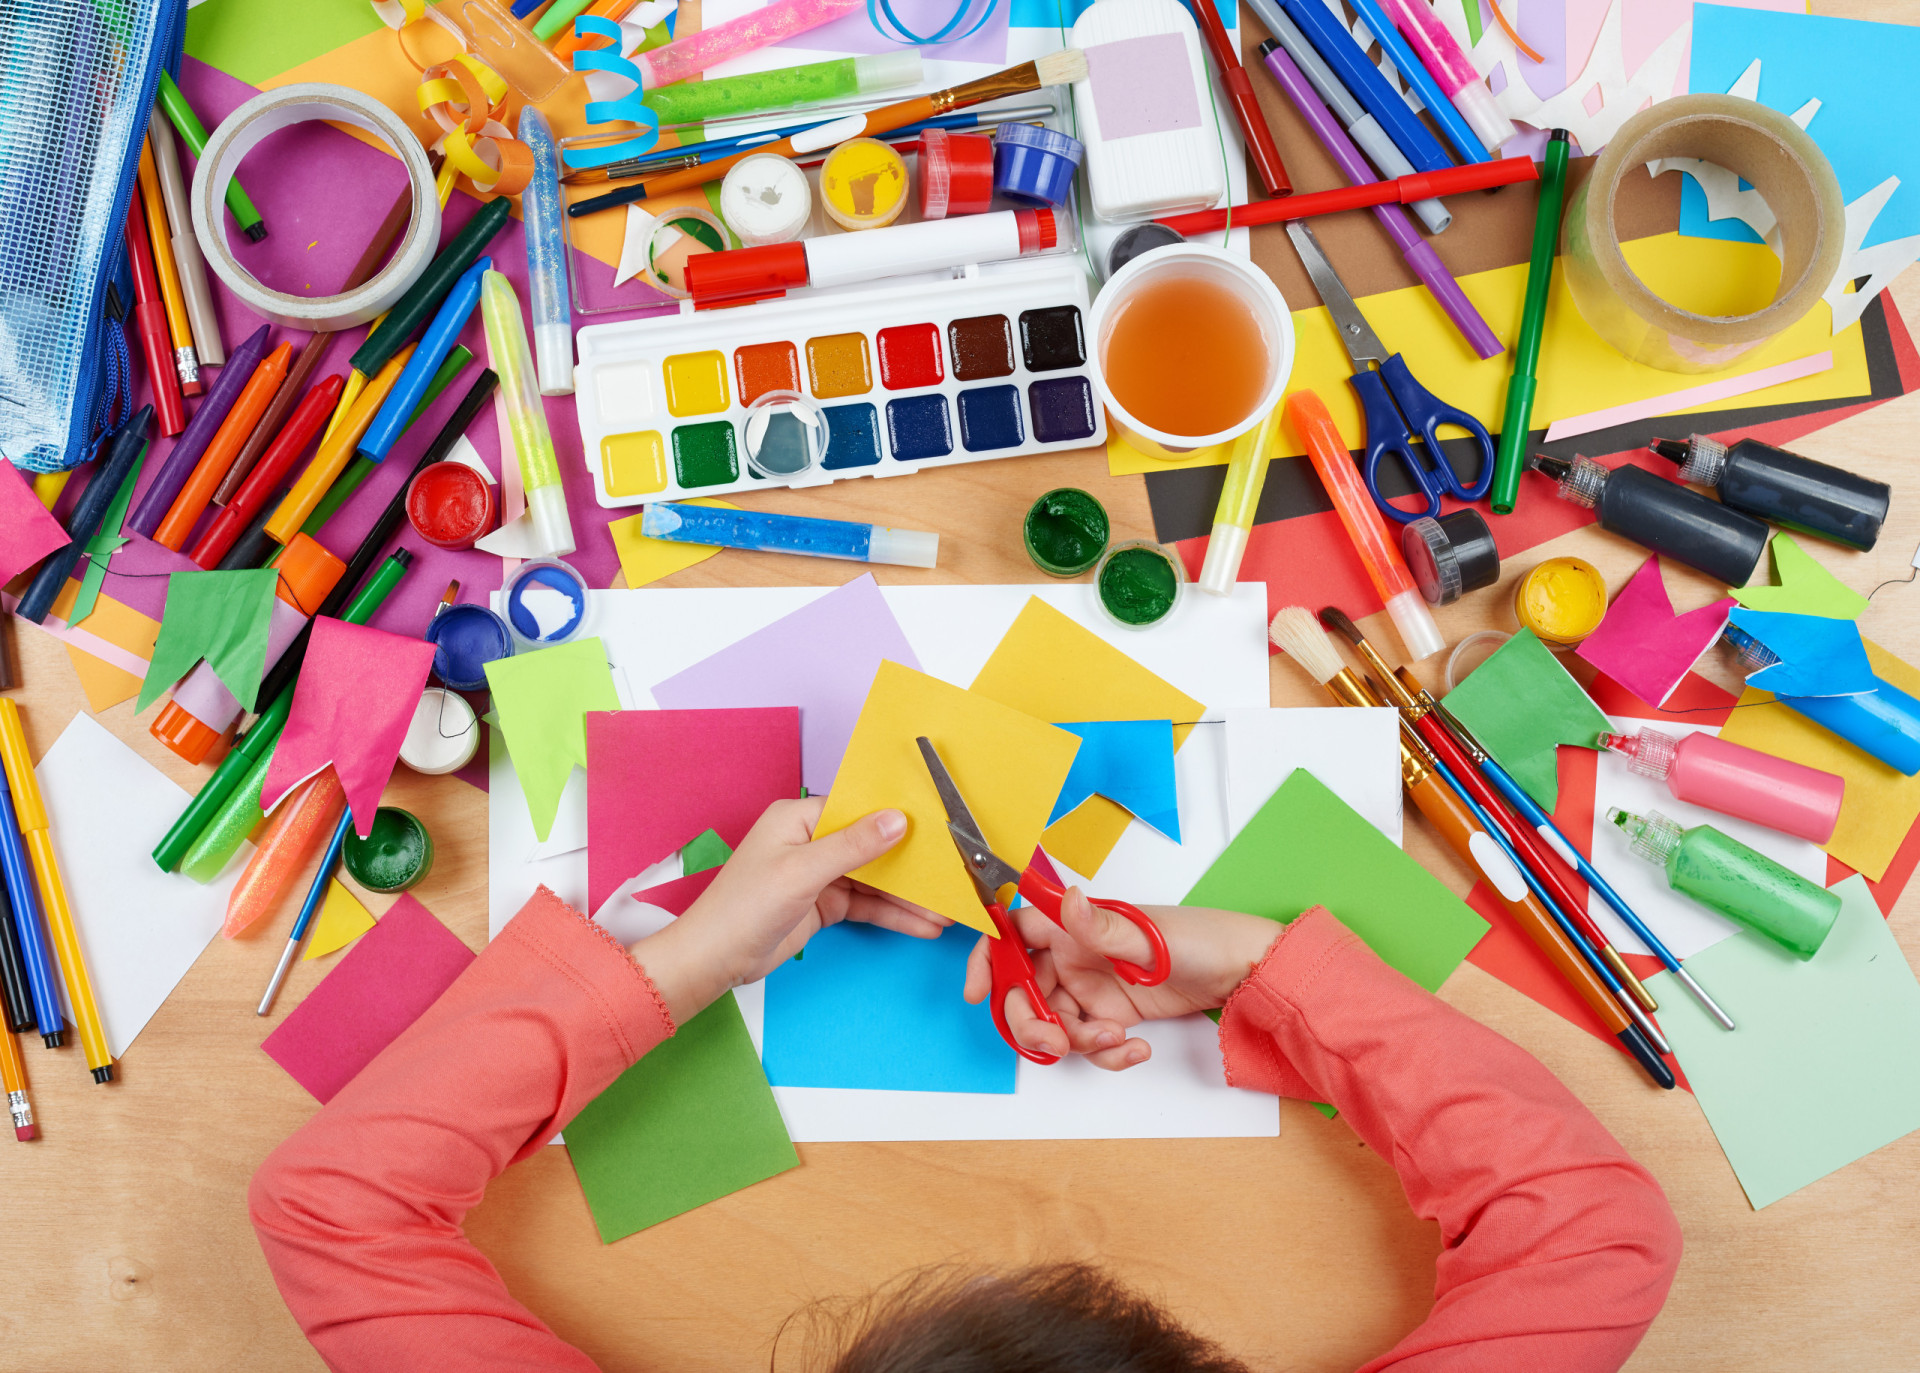 <p>Many creative activities that involve imagination, as well as singing, dancing, and drama, don't necessarily require any tools. But for craftier activities, it's a good idea to have plenty of paper, paints, and crayons on hand.</p><p>You may also like:<a href="https://www.starsinsider.com/n/271742?utm_source=msn.com&utm_medium=display&utm_campaign=referral_description&utm_content=540552en-en"> The deadliest places in the world</a></p>